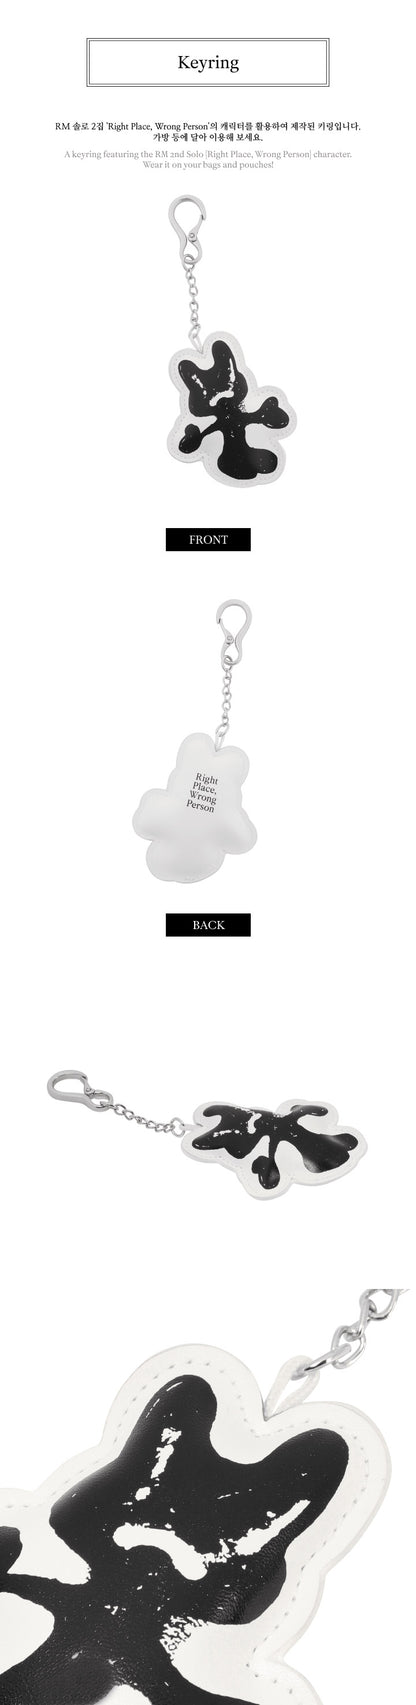 [PRE ORDER] RM - [RIGHT PLACE, WRONG PERSON] (Official MD)  / KEYRING